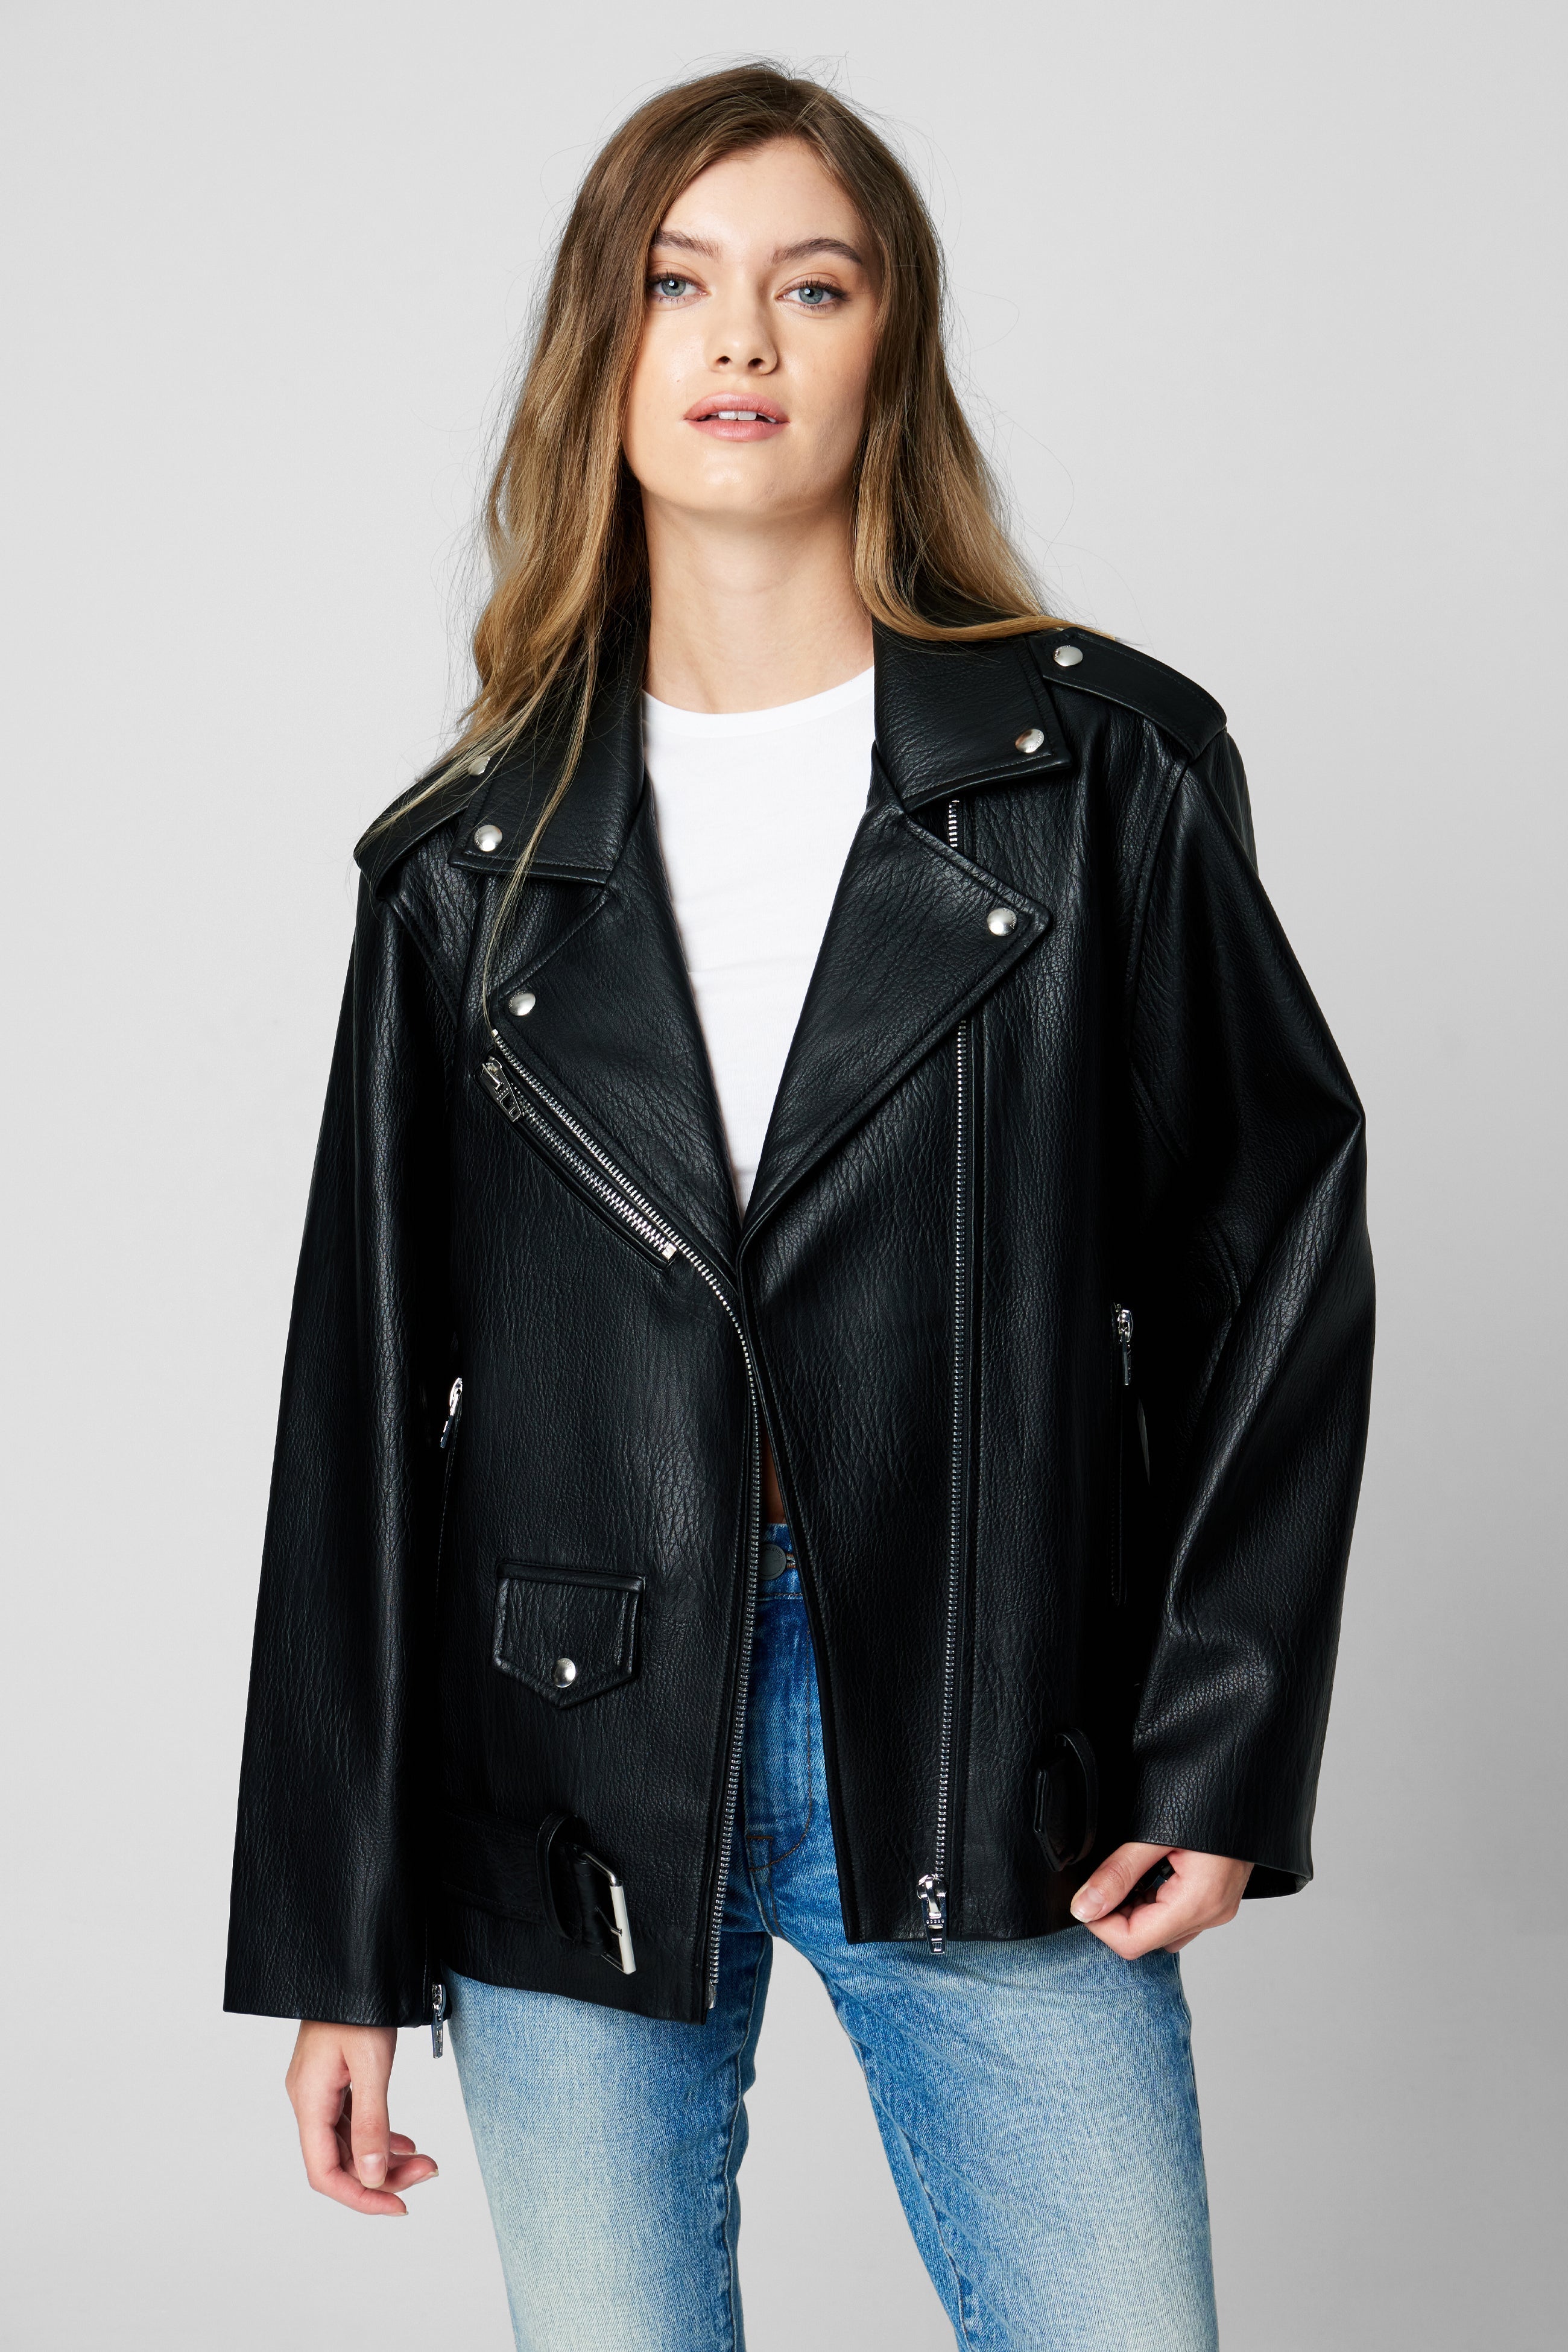 The back of this "Hannah" black leather jacket from Wink boasts  double rows of bronze studs, but the frontÂ's plenty cool, too, with its  thick ruffle accent ($496, www.shopsheboutique.com). Softening the look